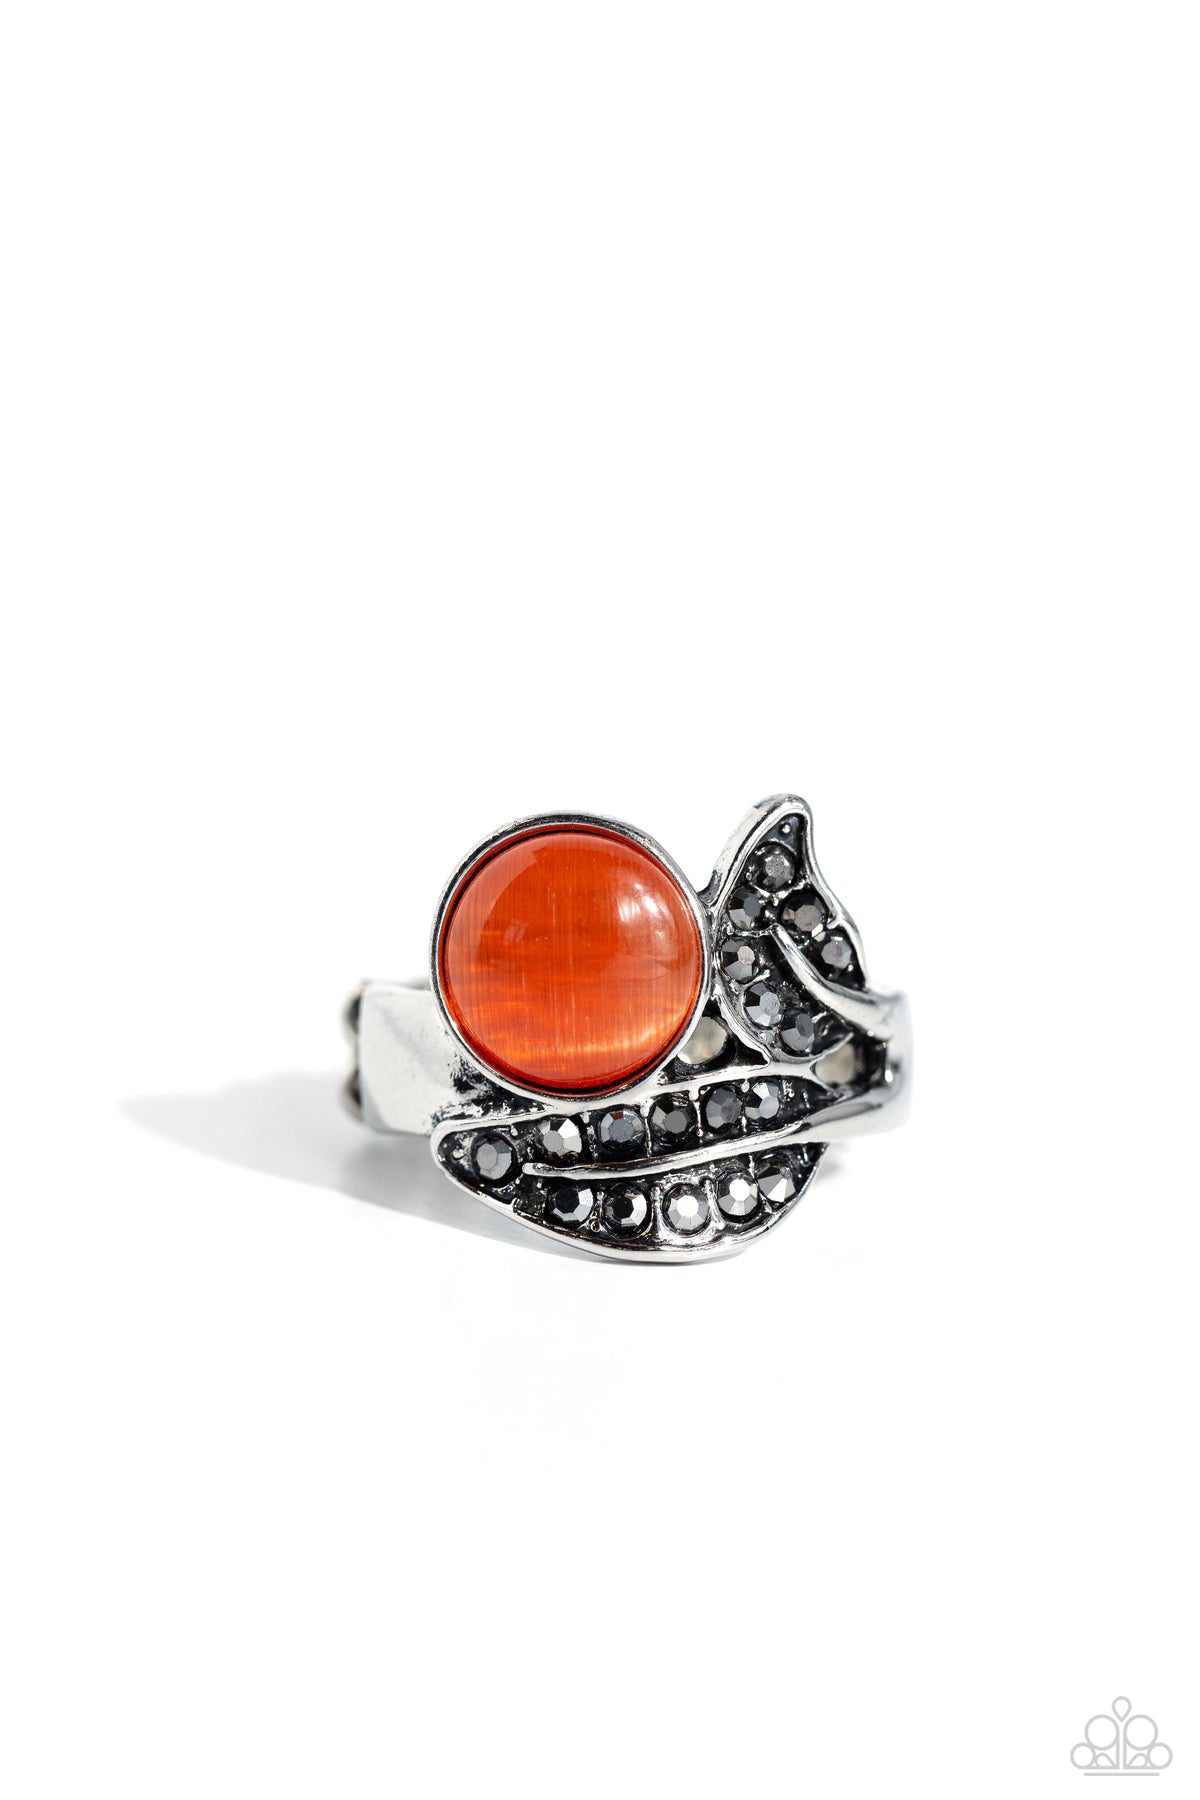 Cats Eye Candy Orange Stone Ring - Paparazzi Accessories- lightbox - CarasShop.com - $5 Jewelry by Cara Jewels